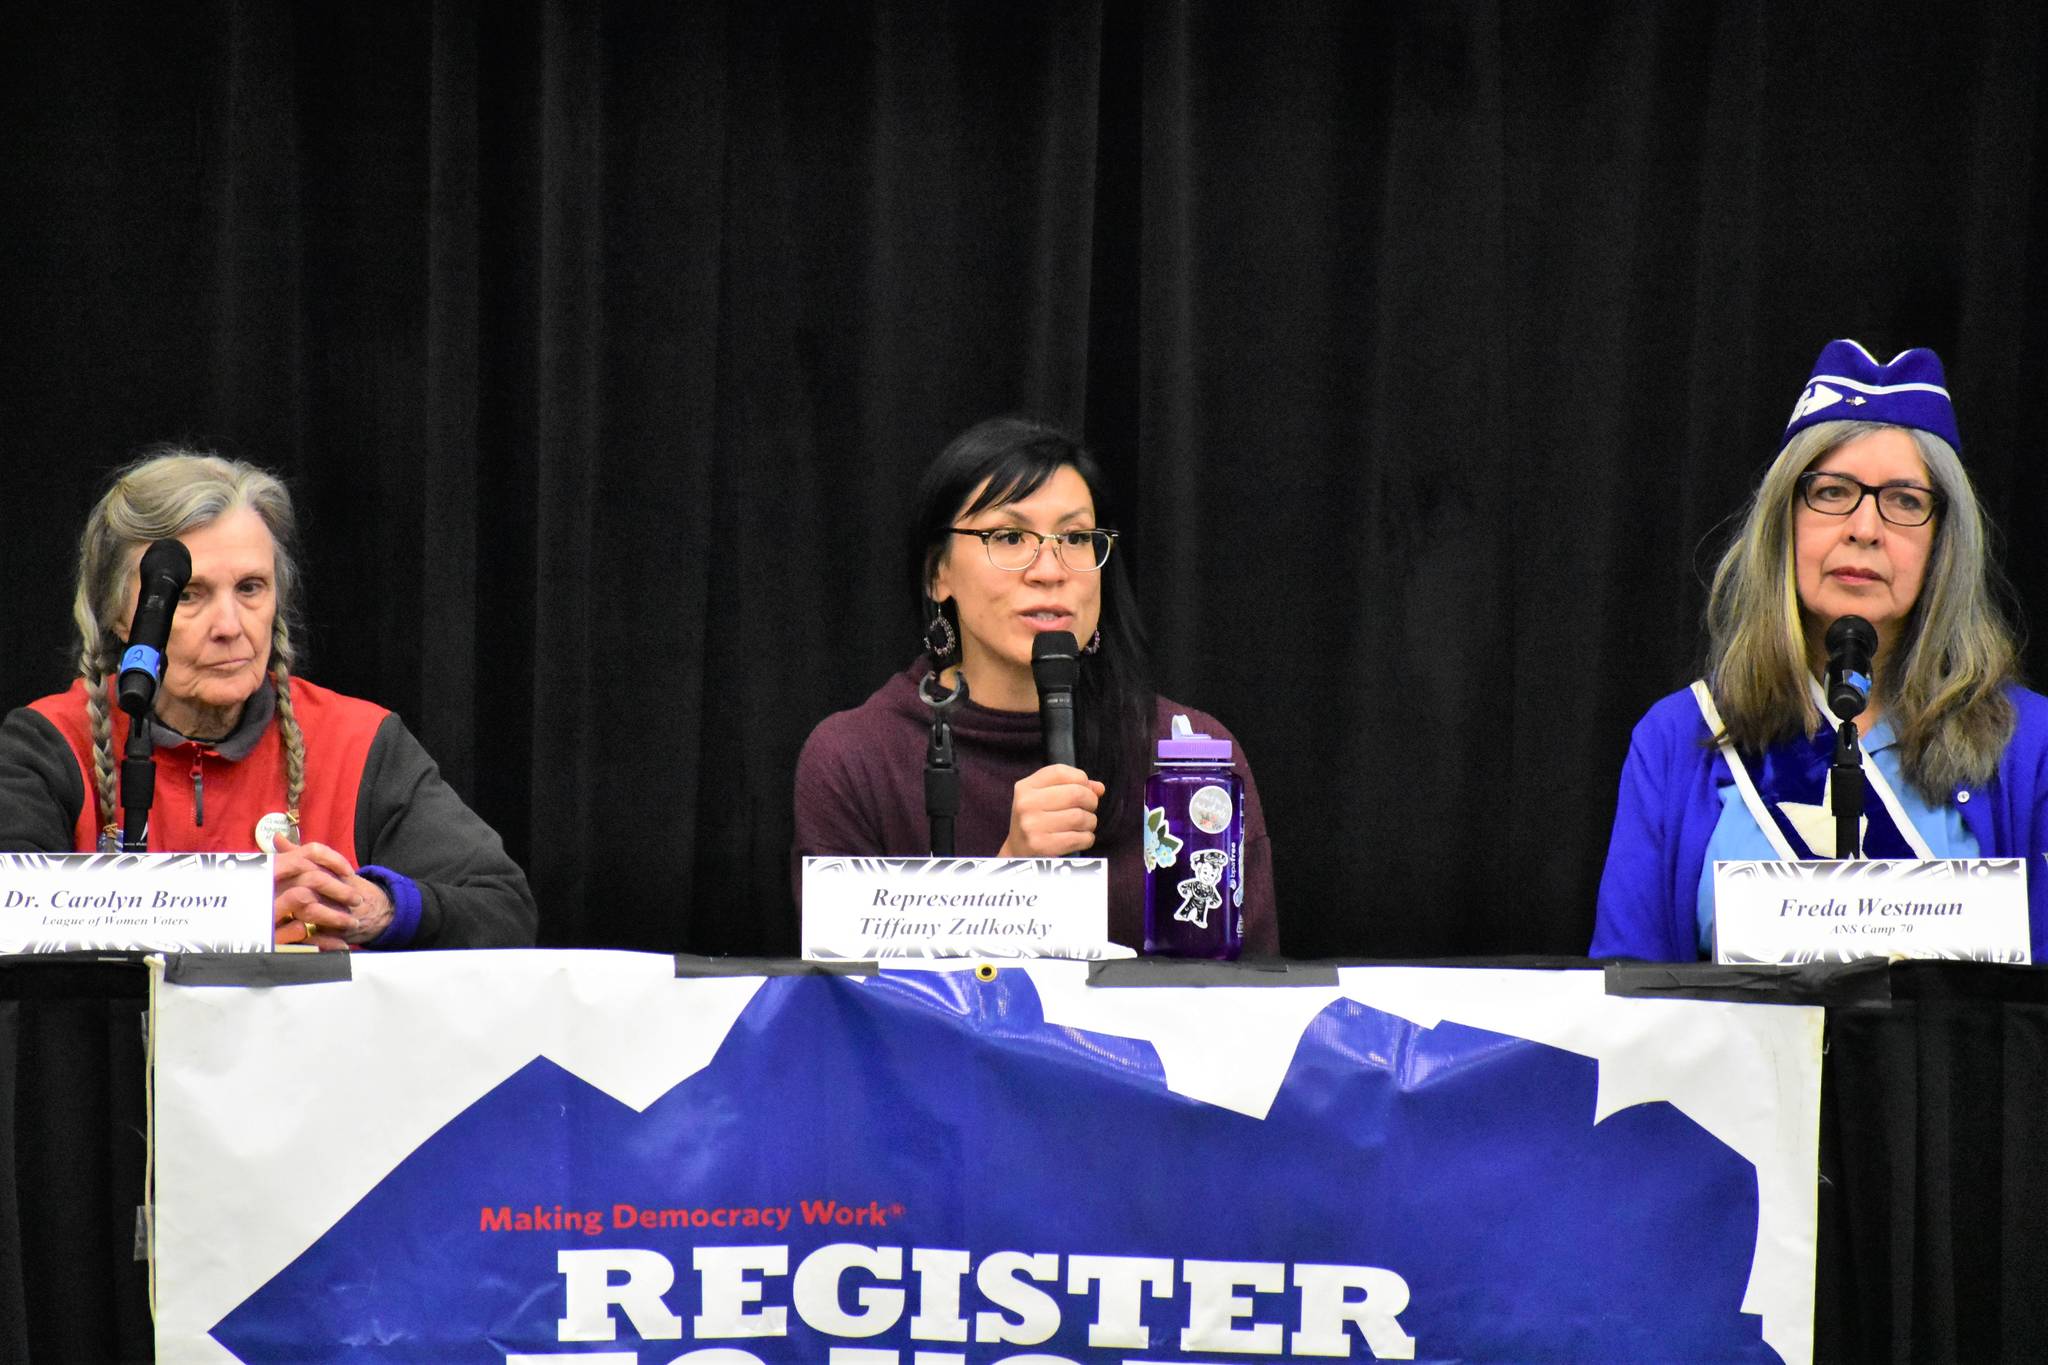 Rep. Tiffany Zulkosky, D-Bethel, center, speaks at the Native Issues Forum at Elizabeth Peratrovich Hall with Dr. carolyn Brown, left, and Freda Westman, right, on Monday.                                Peter Segall | Juneau Empire